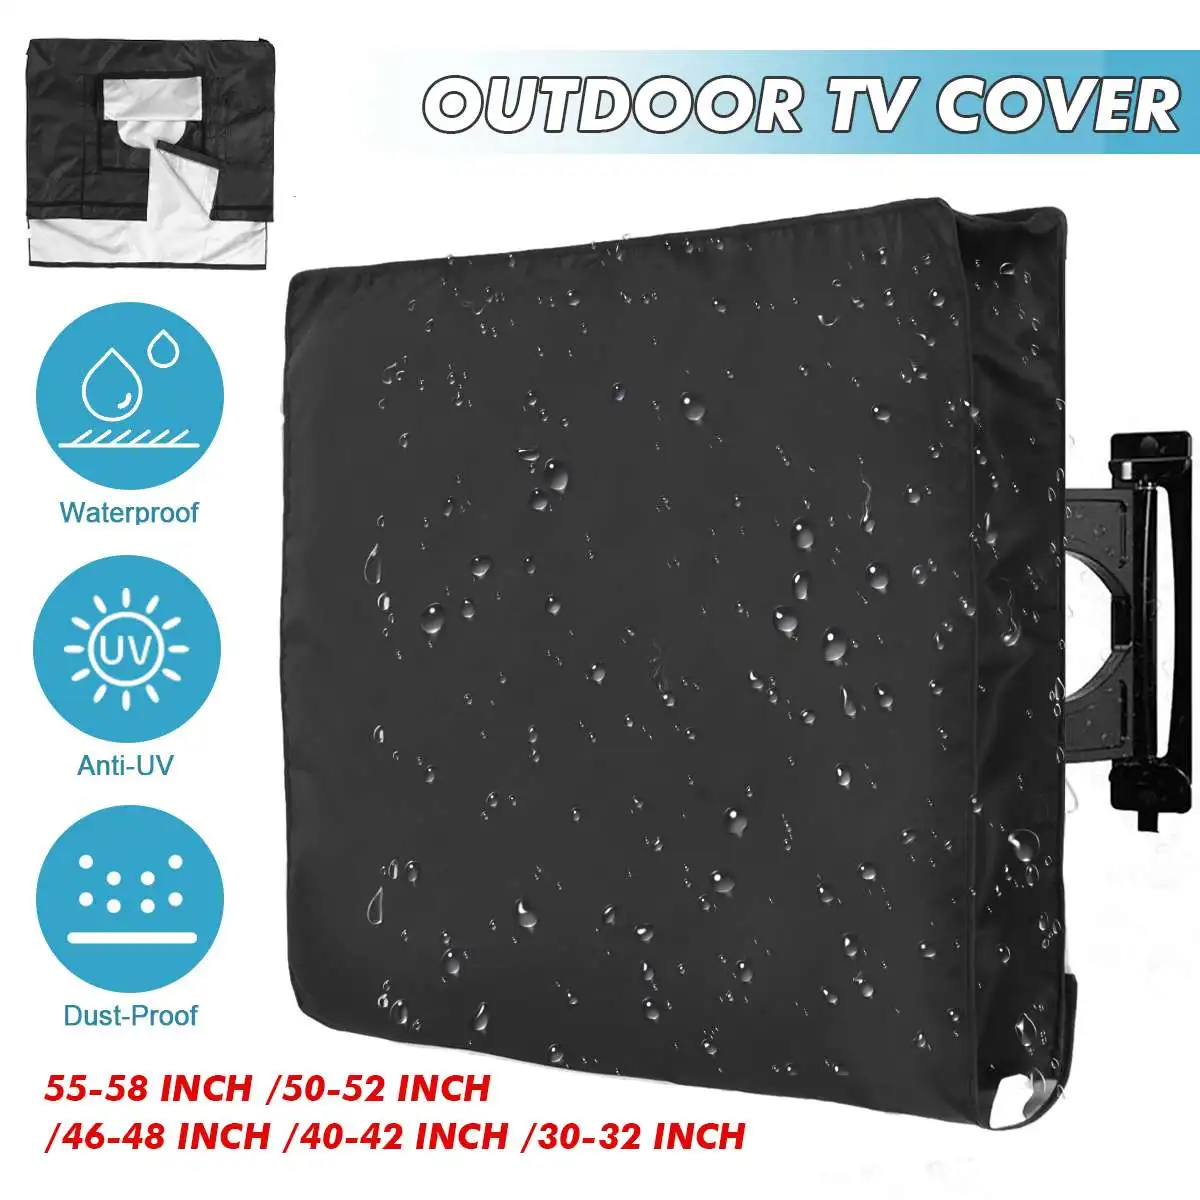 Weatherproof Outdoor TV Cover Protect TV Screen Dustproof Waterproof Cover All-Purpose Dust Cover Television Case for 30"-58" TV